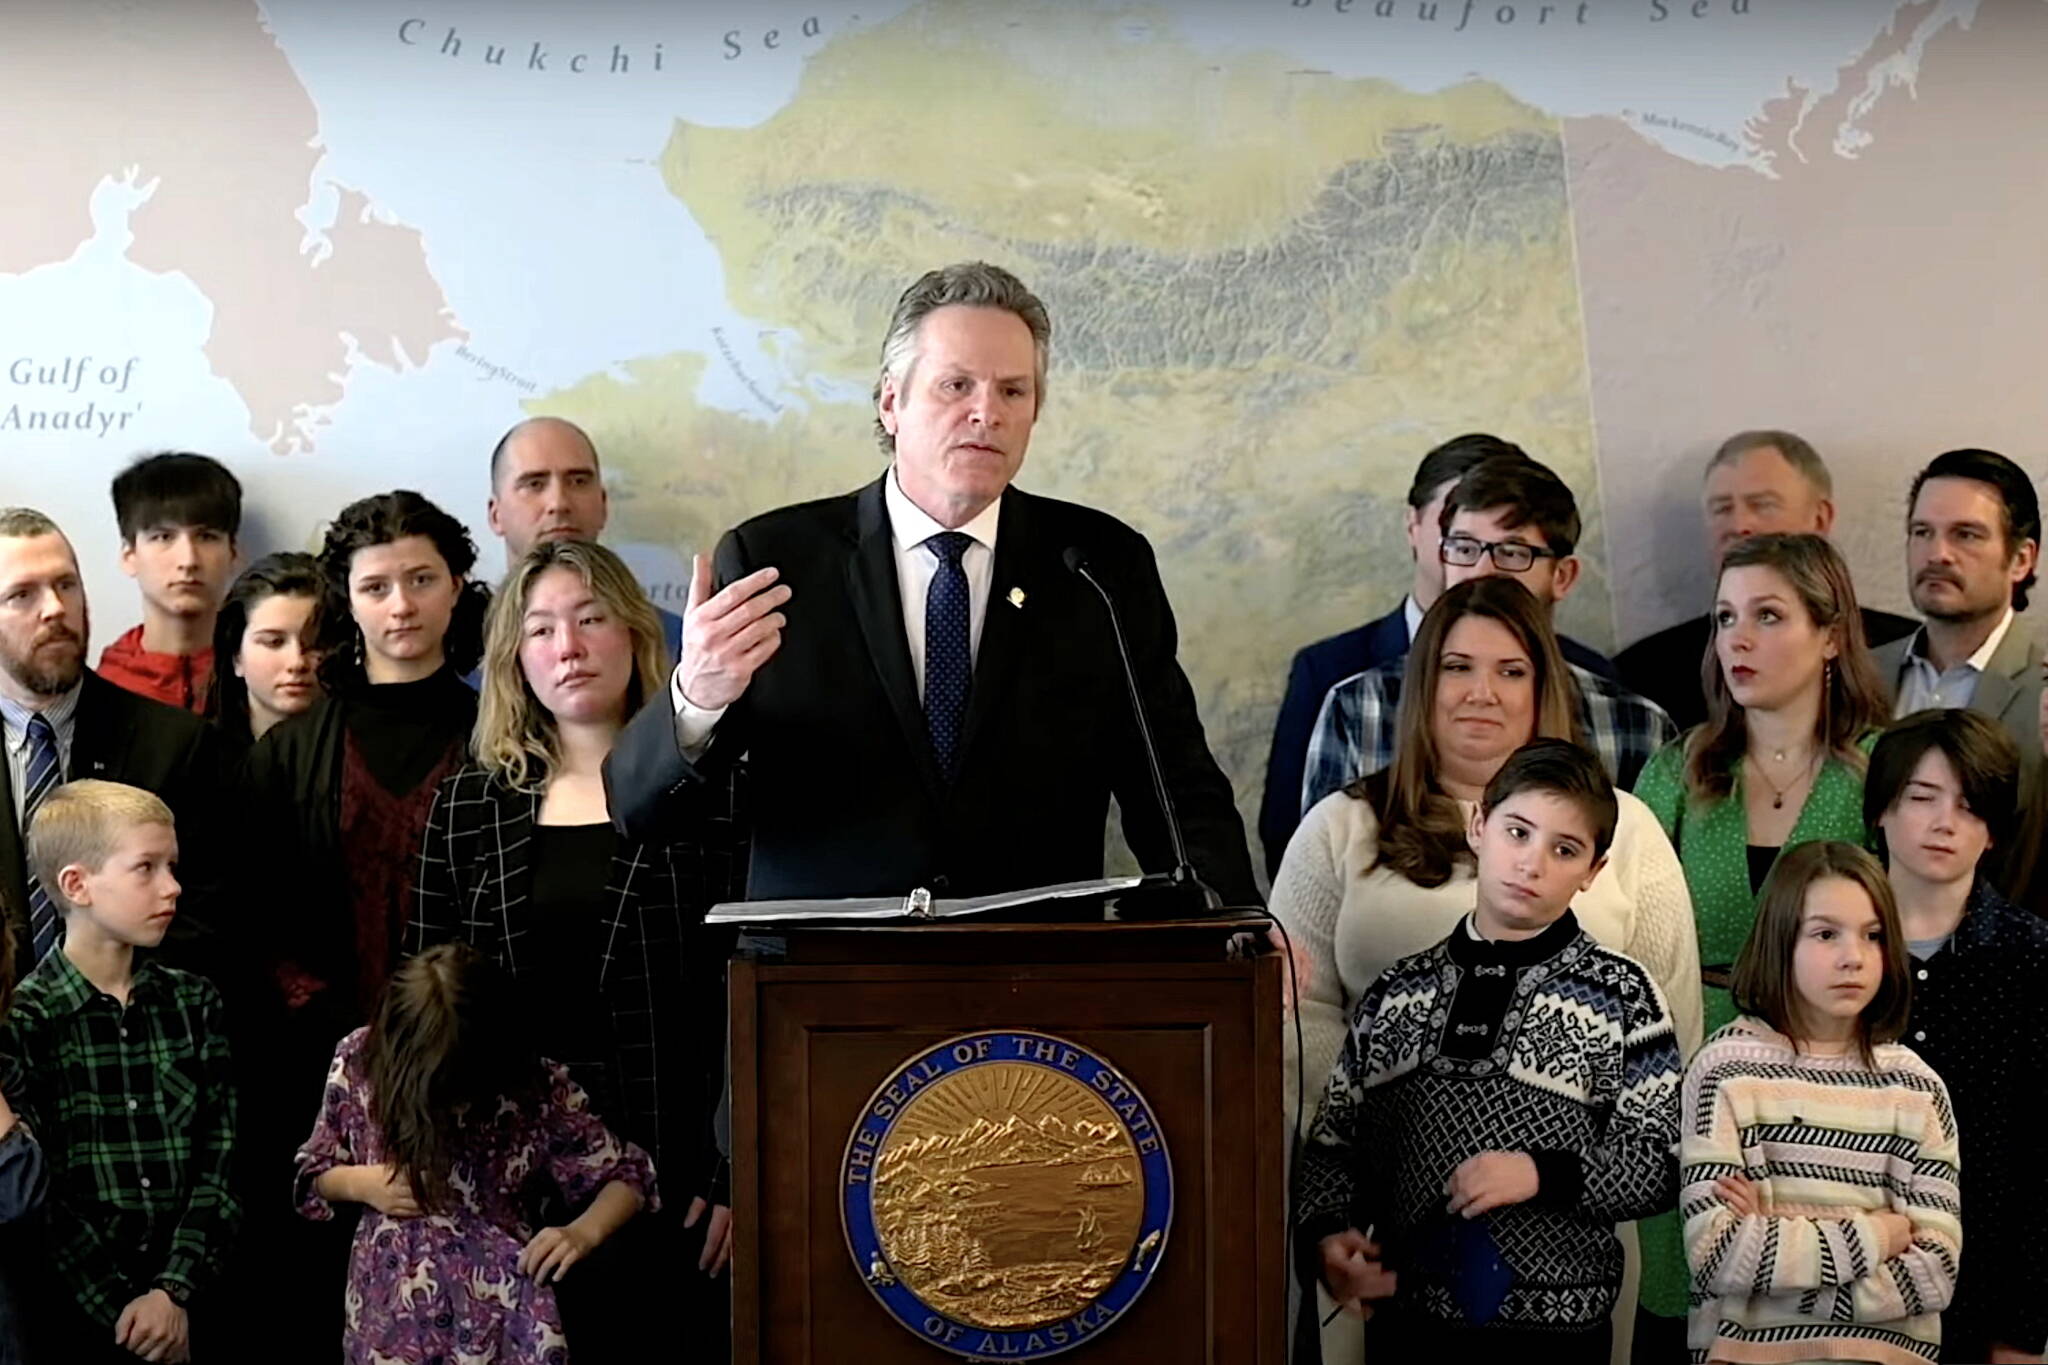 Gov. Mike Dunleavy unveils proposals to offer public school teachers annual retention bonuses and enact policies similar so-called “don’t say gay” laws in states such as Florida during a press conference in Anchorage on Tuesday. (Screenshot from official livestream)